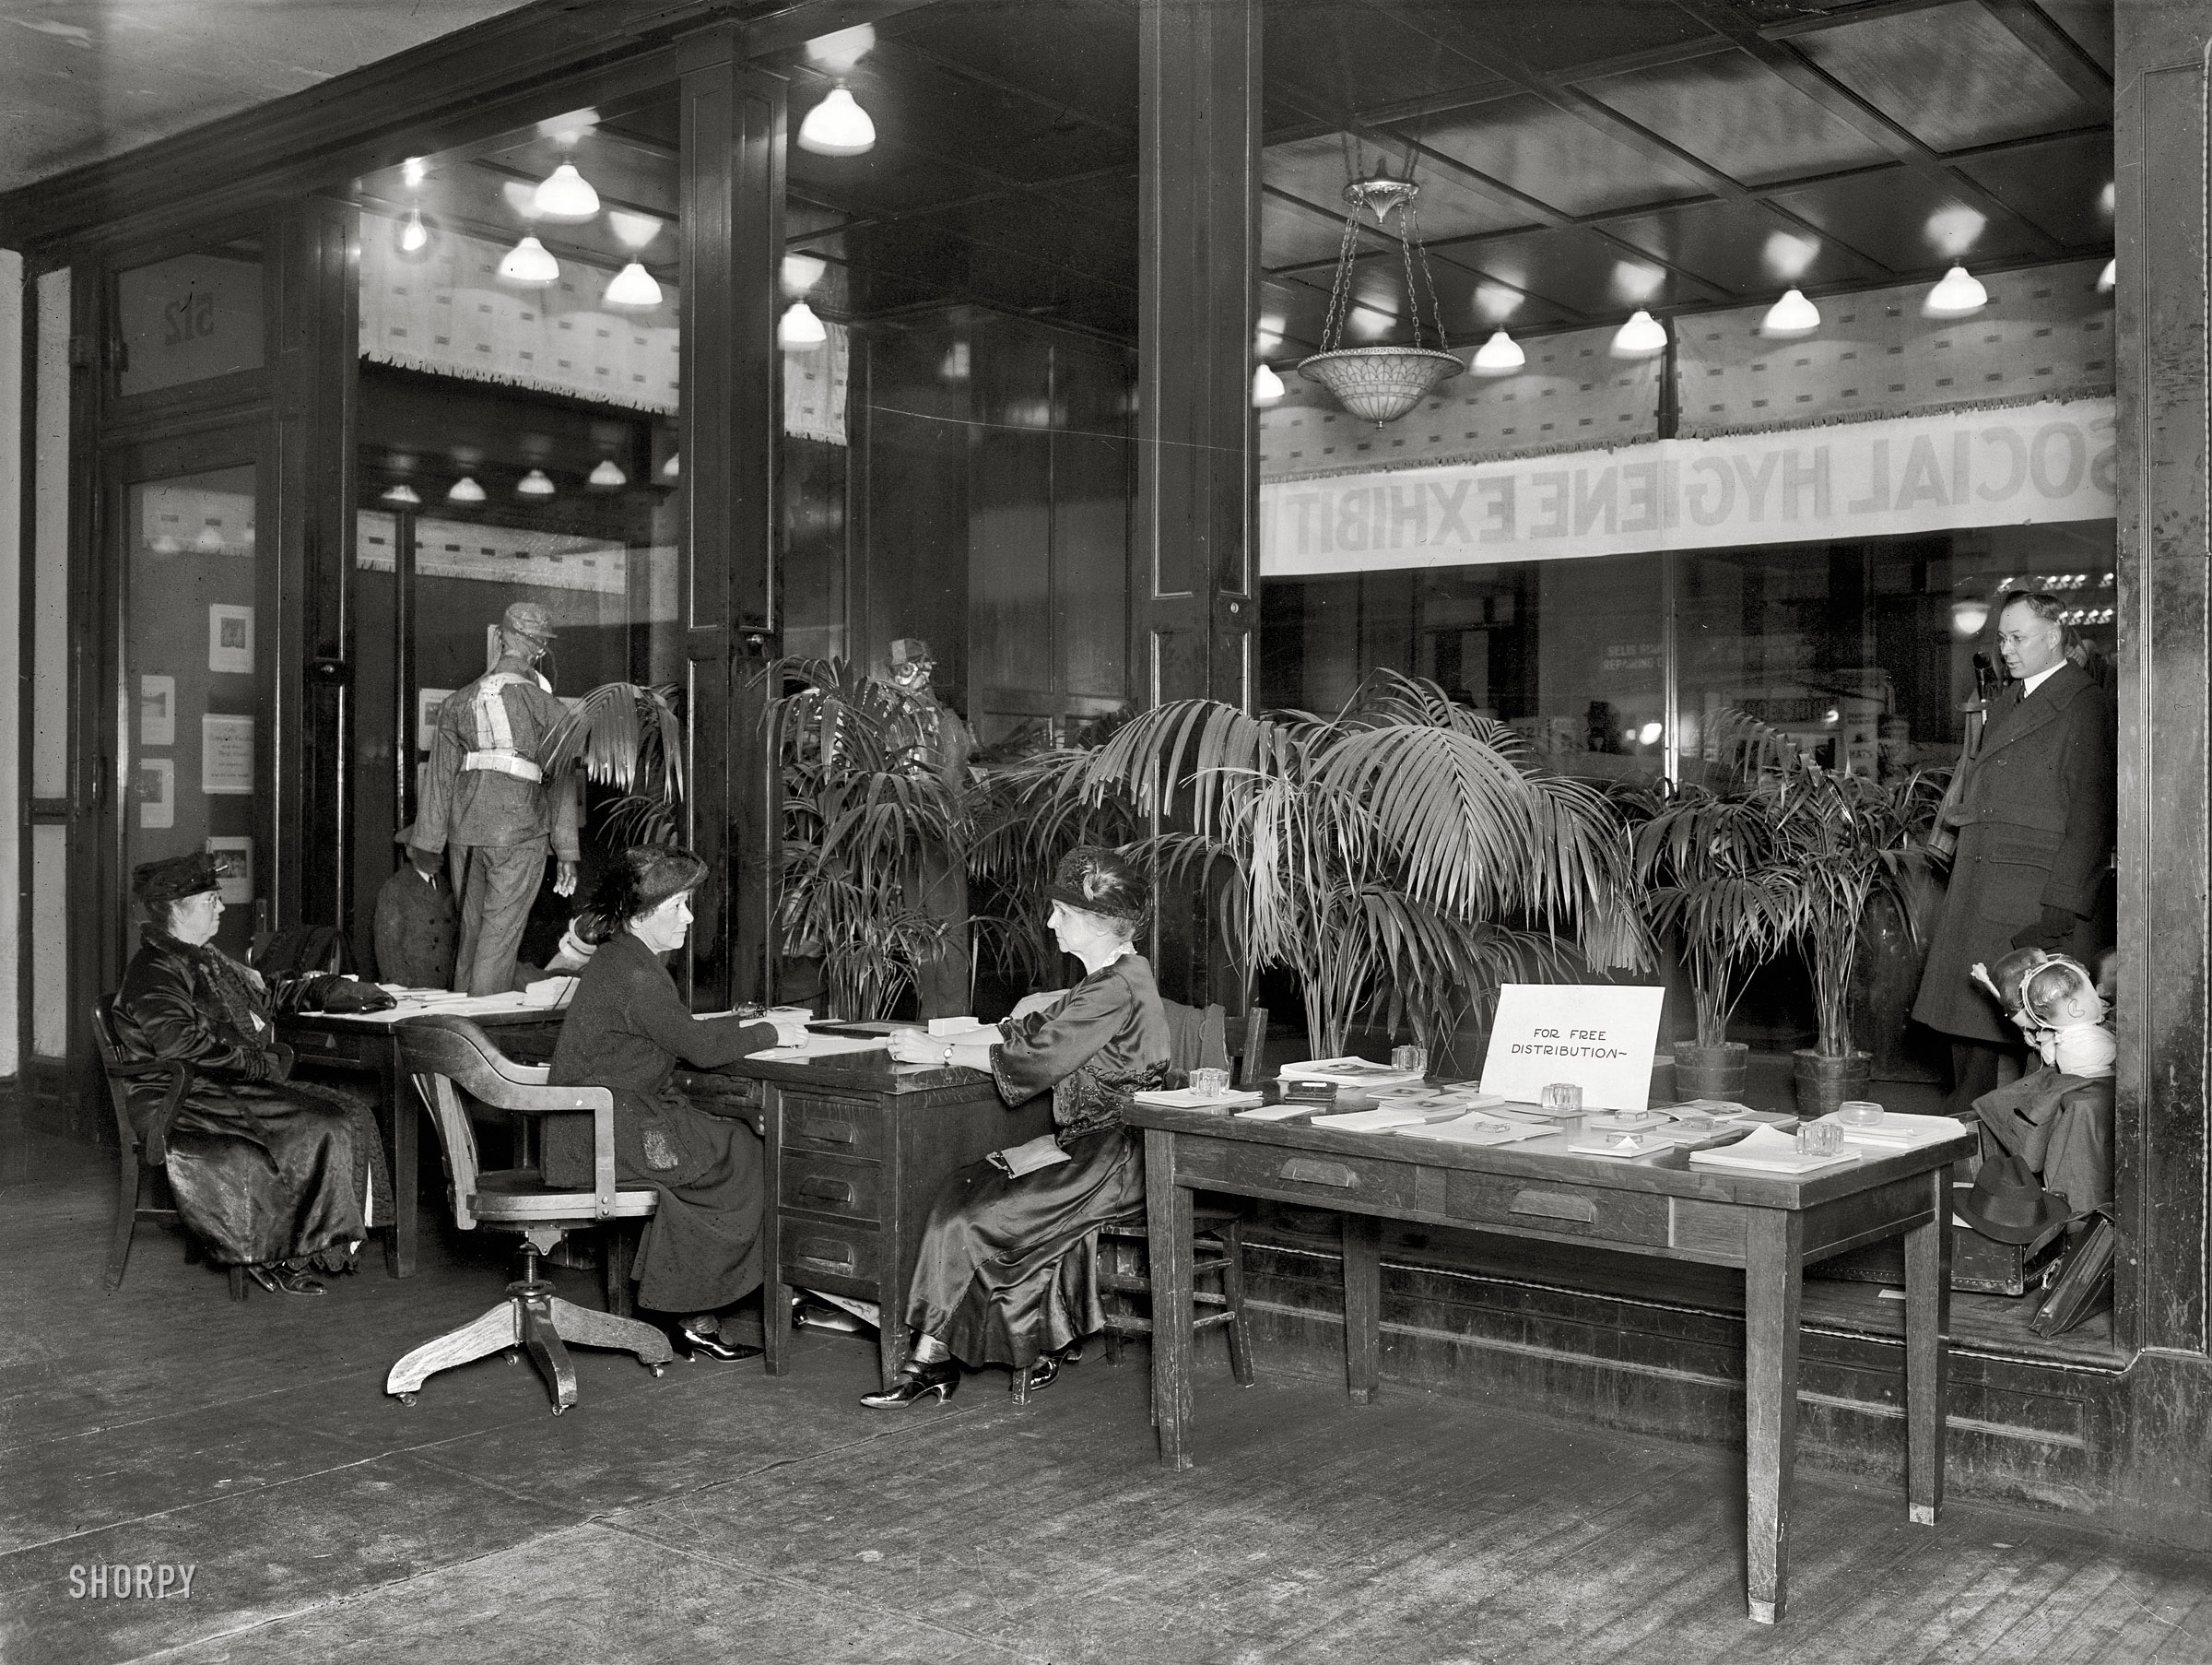 Washington, D.C., 1922. "Social Hygiene Society exhibit." A peek inside reveals the period-appropriate use of scary dolls and mannequins in a variety of cryptic tableaux. National Photo Company Collection glass negative. View full size.